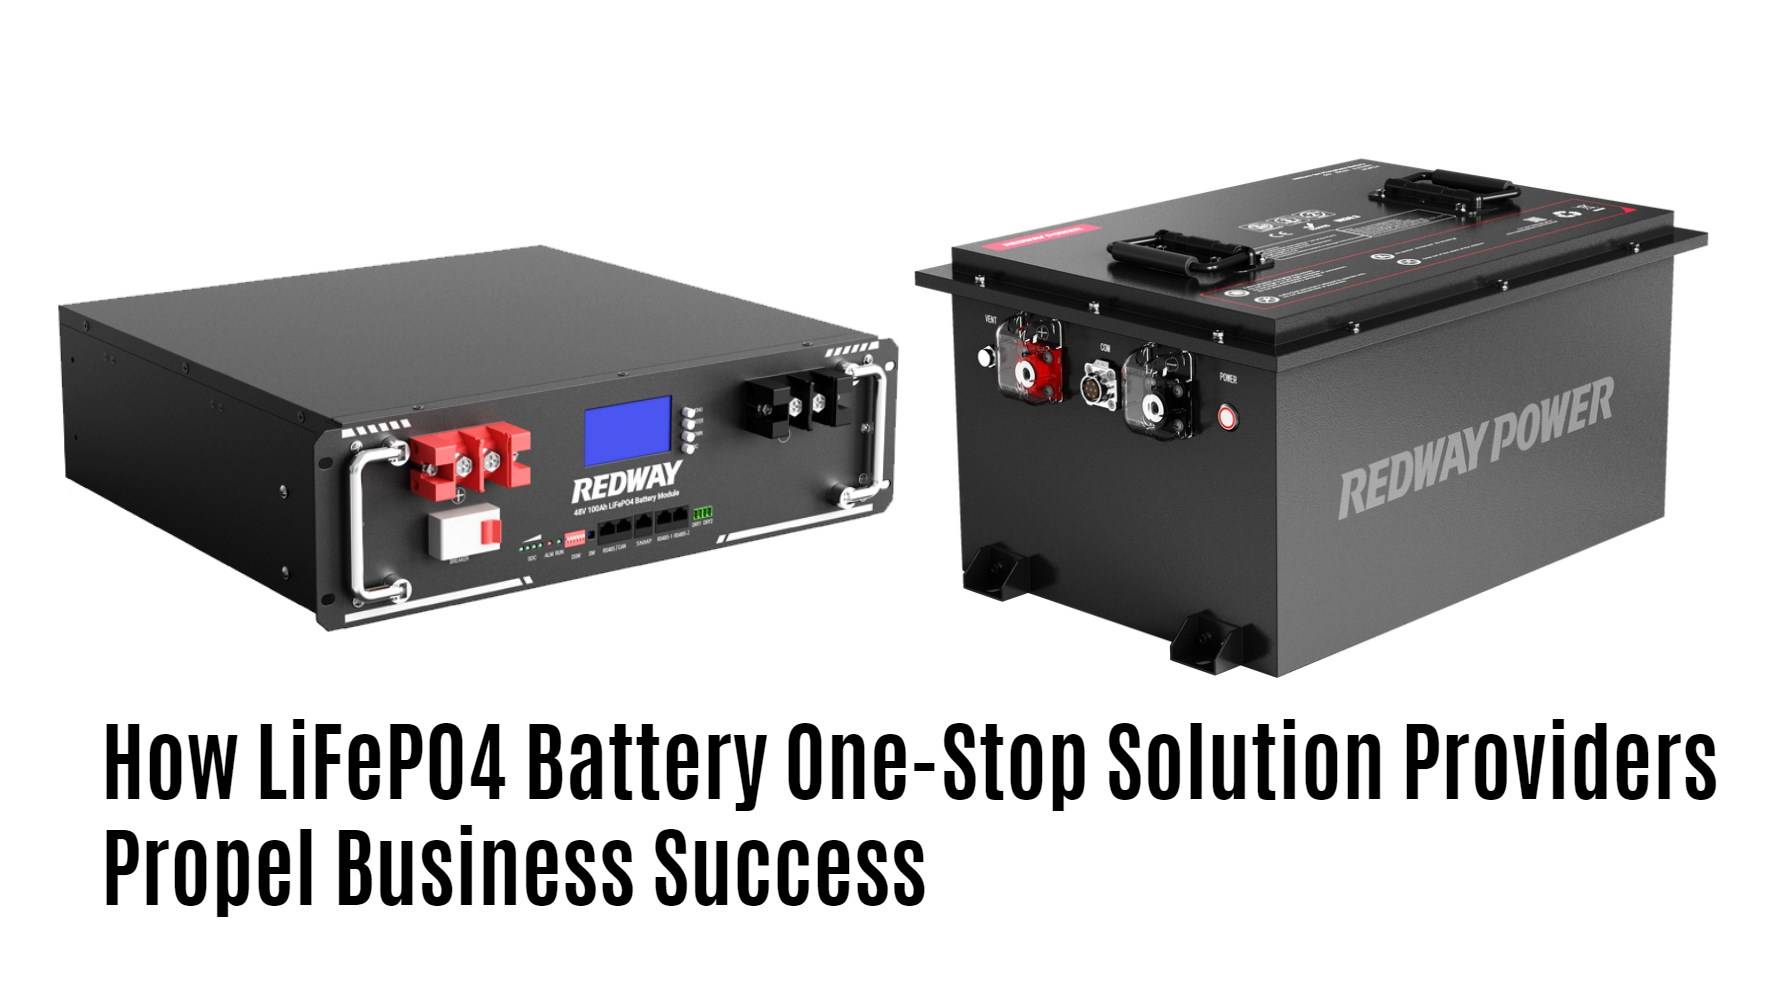 How LiFePO4 Battery One-Stop Solution Providers Propel Business Success